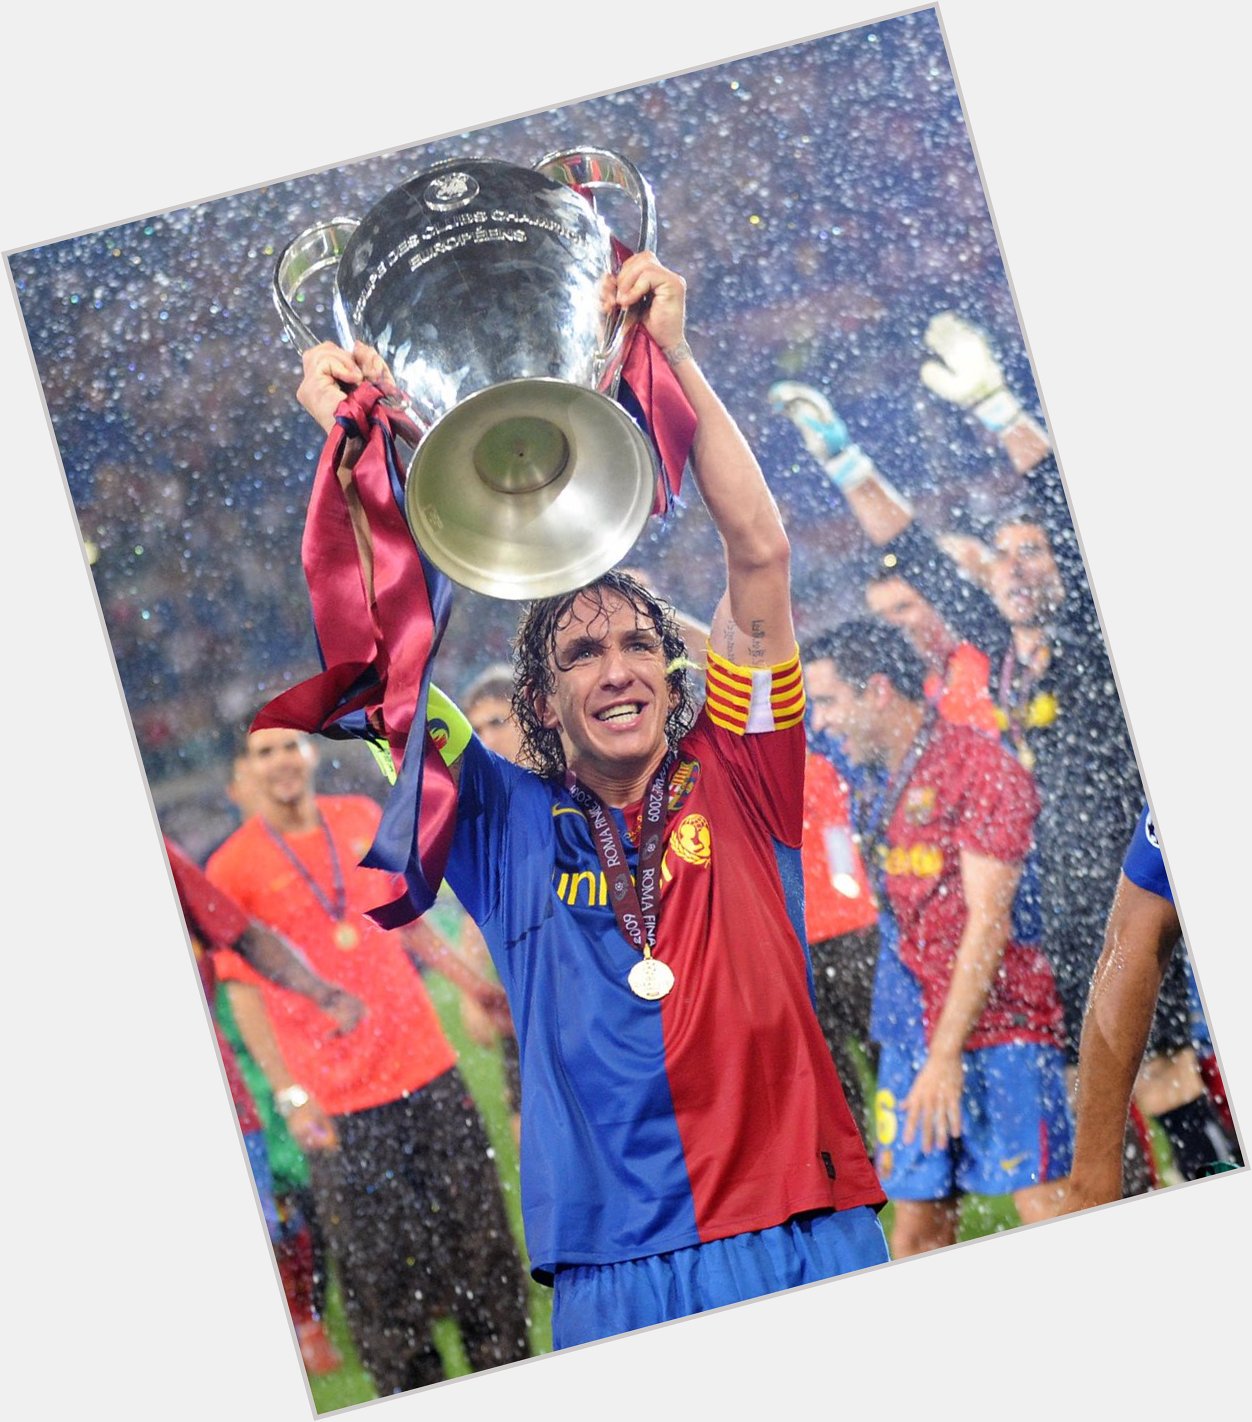 One of the greatest ever defenders.

Happy birthday, Carles Puyol. 